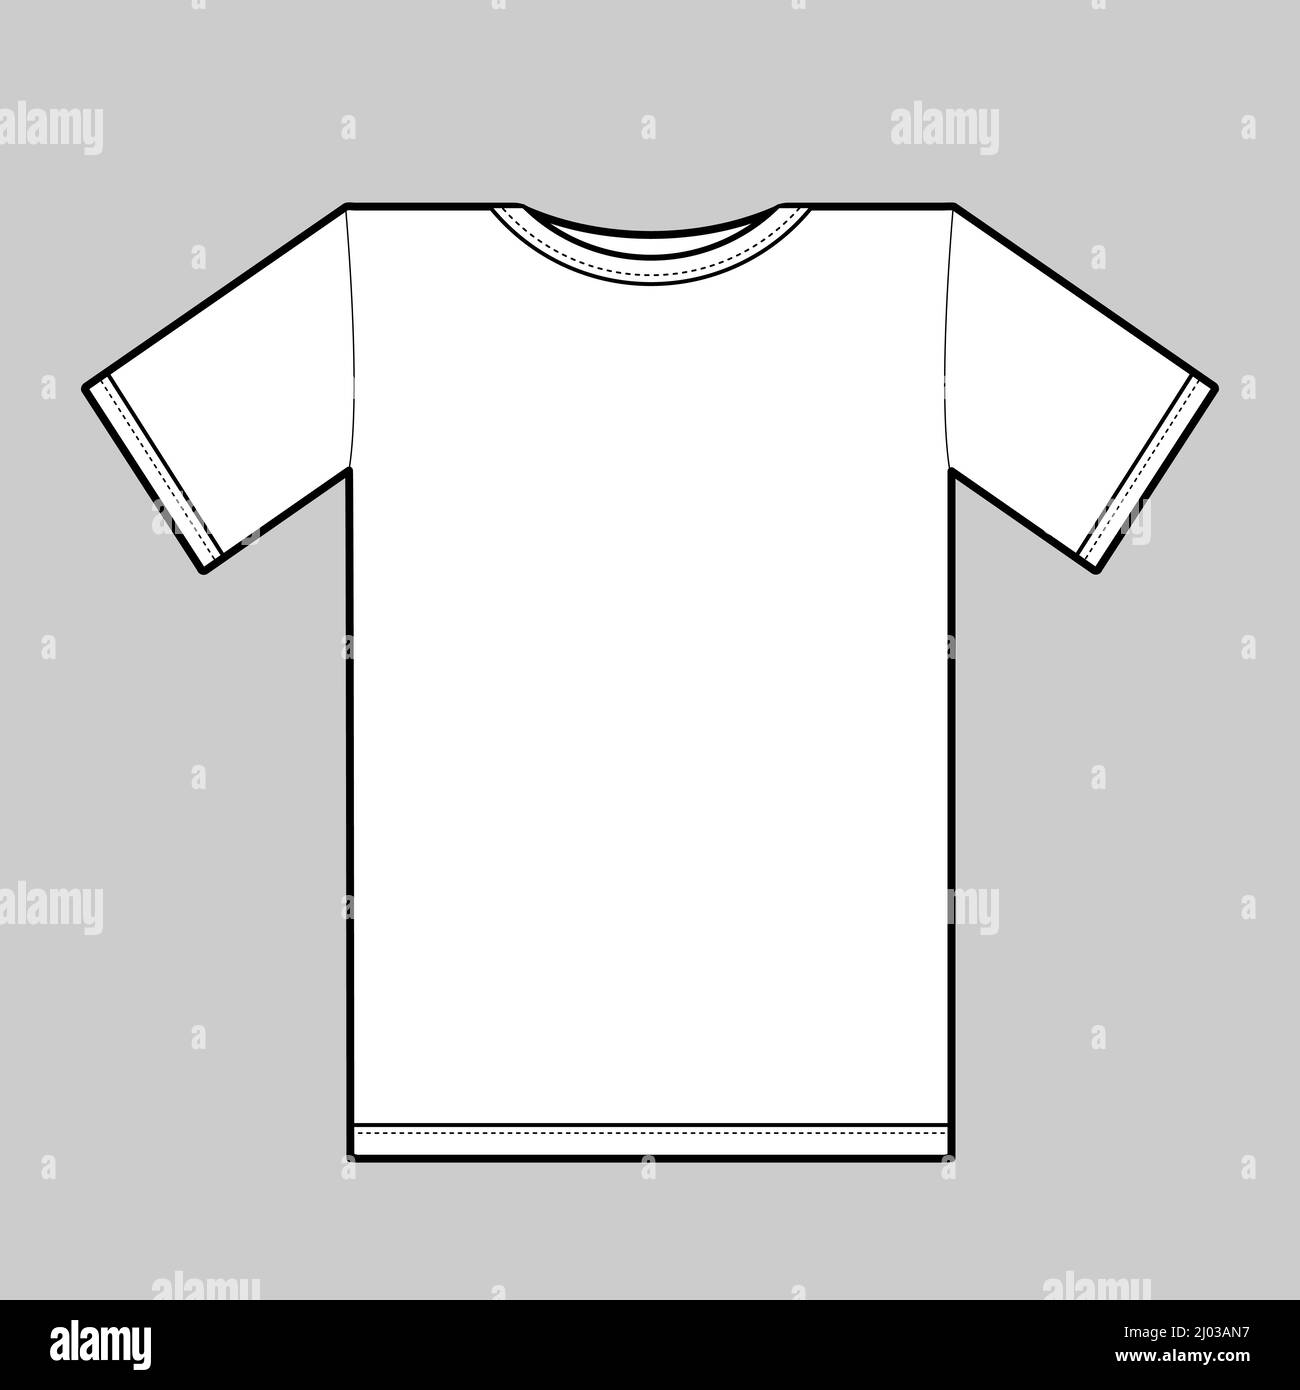 Blank white T-shirt template isolated on gray background. Vector illustration Stock Vector